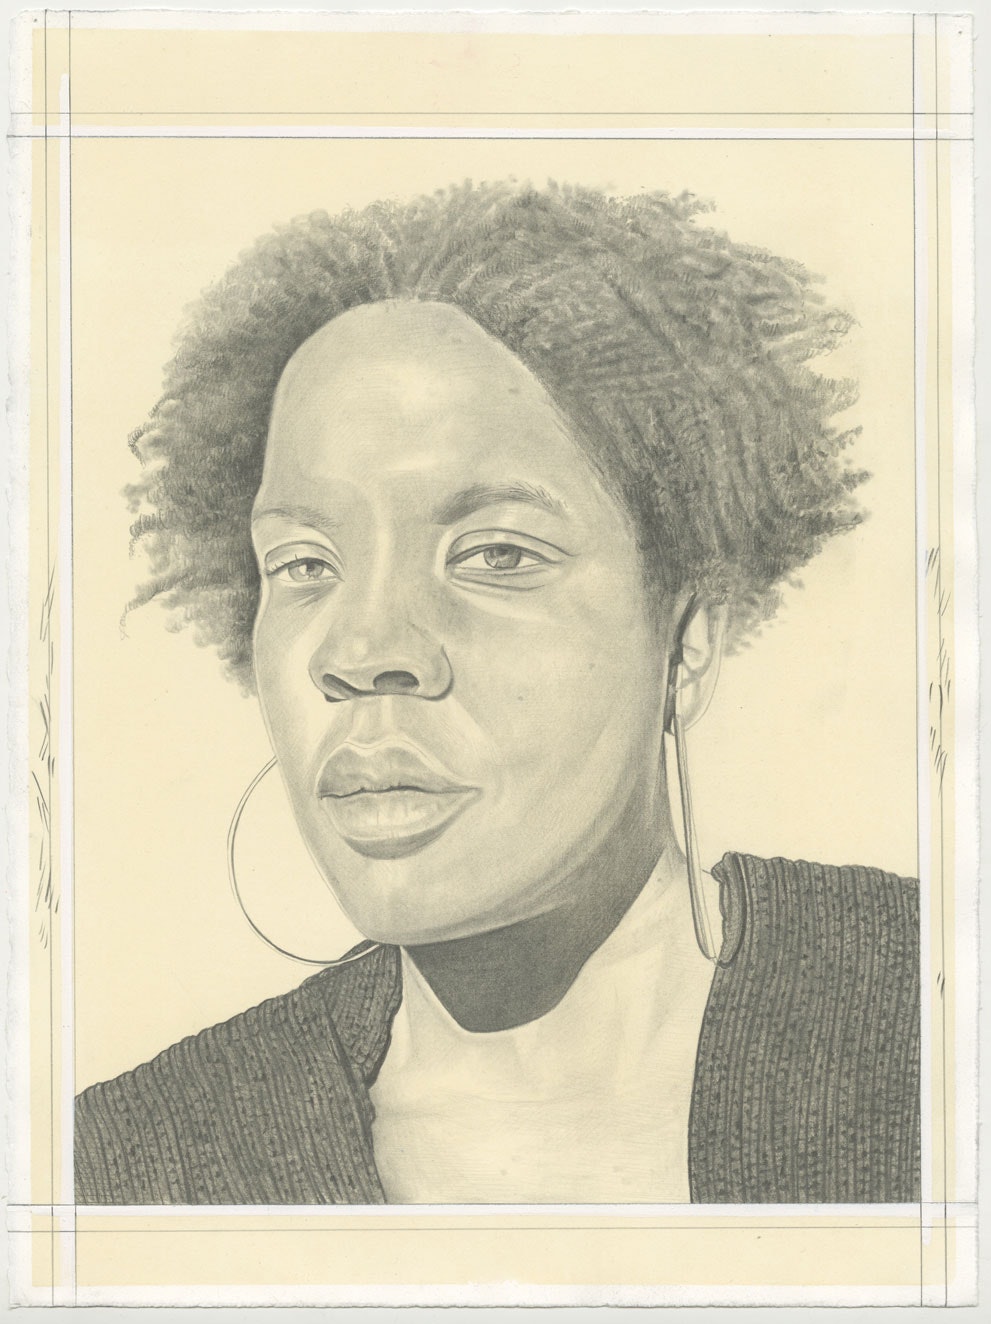 Portrait of Xaviera Simmons, pencil on paper by Phong H. Bui.